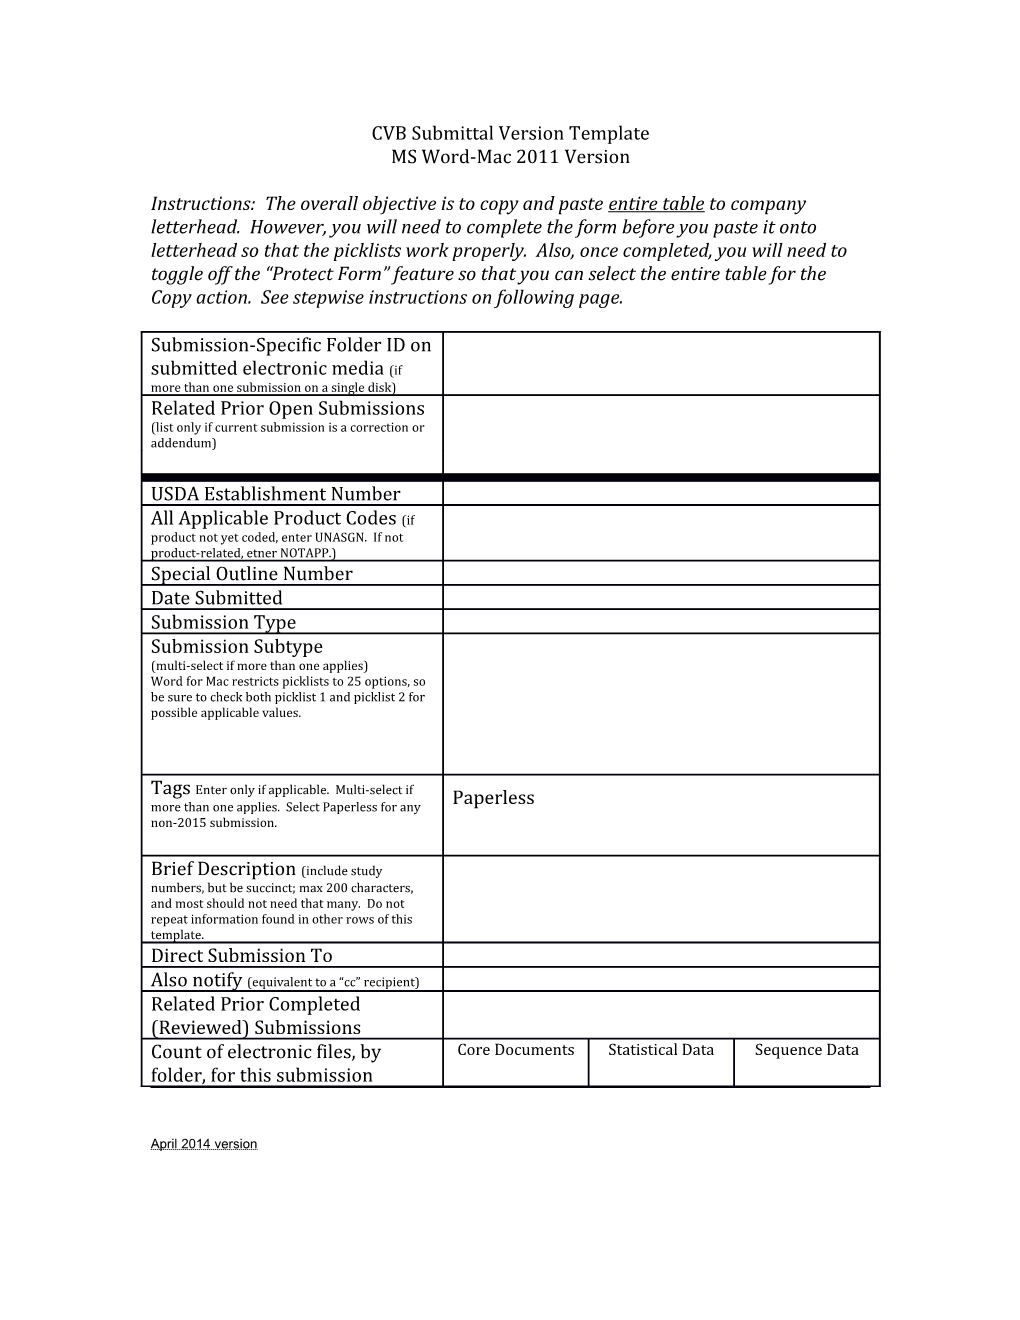 CVB Submittal Version Template